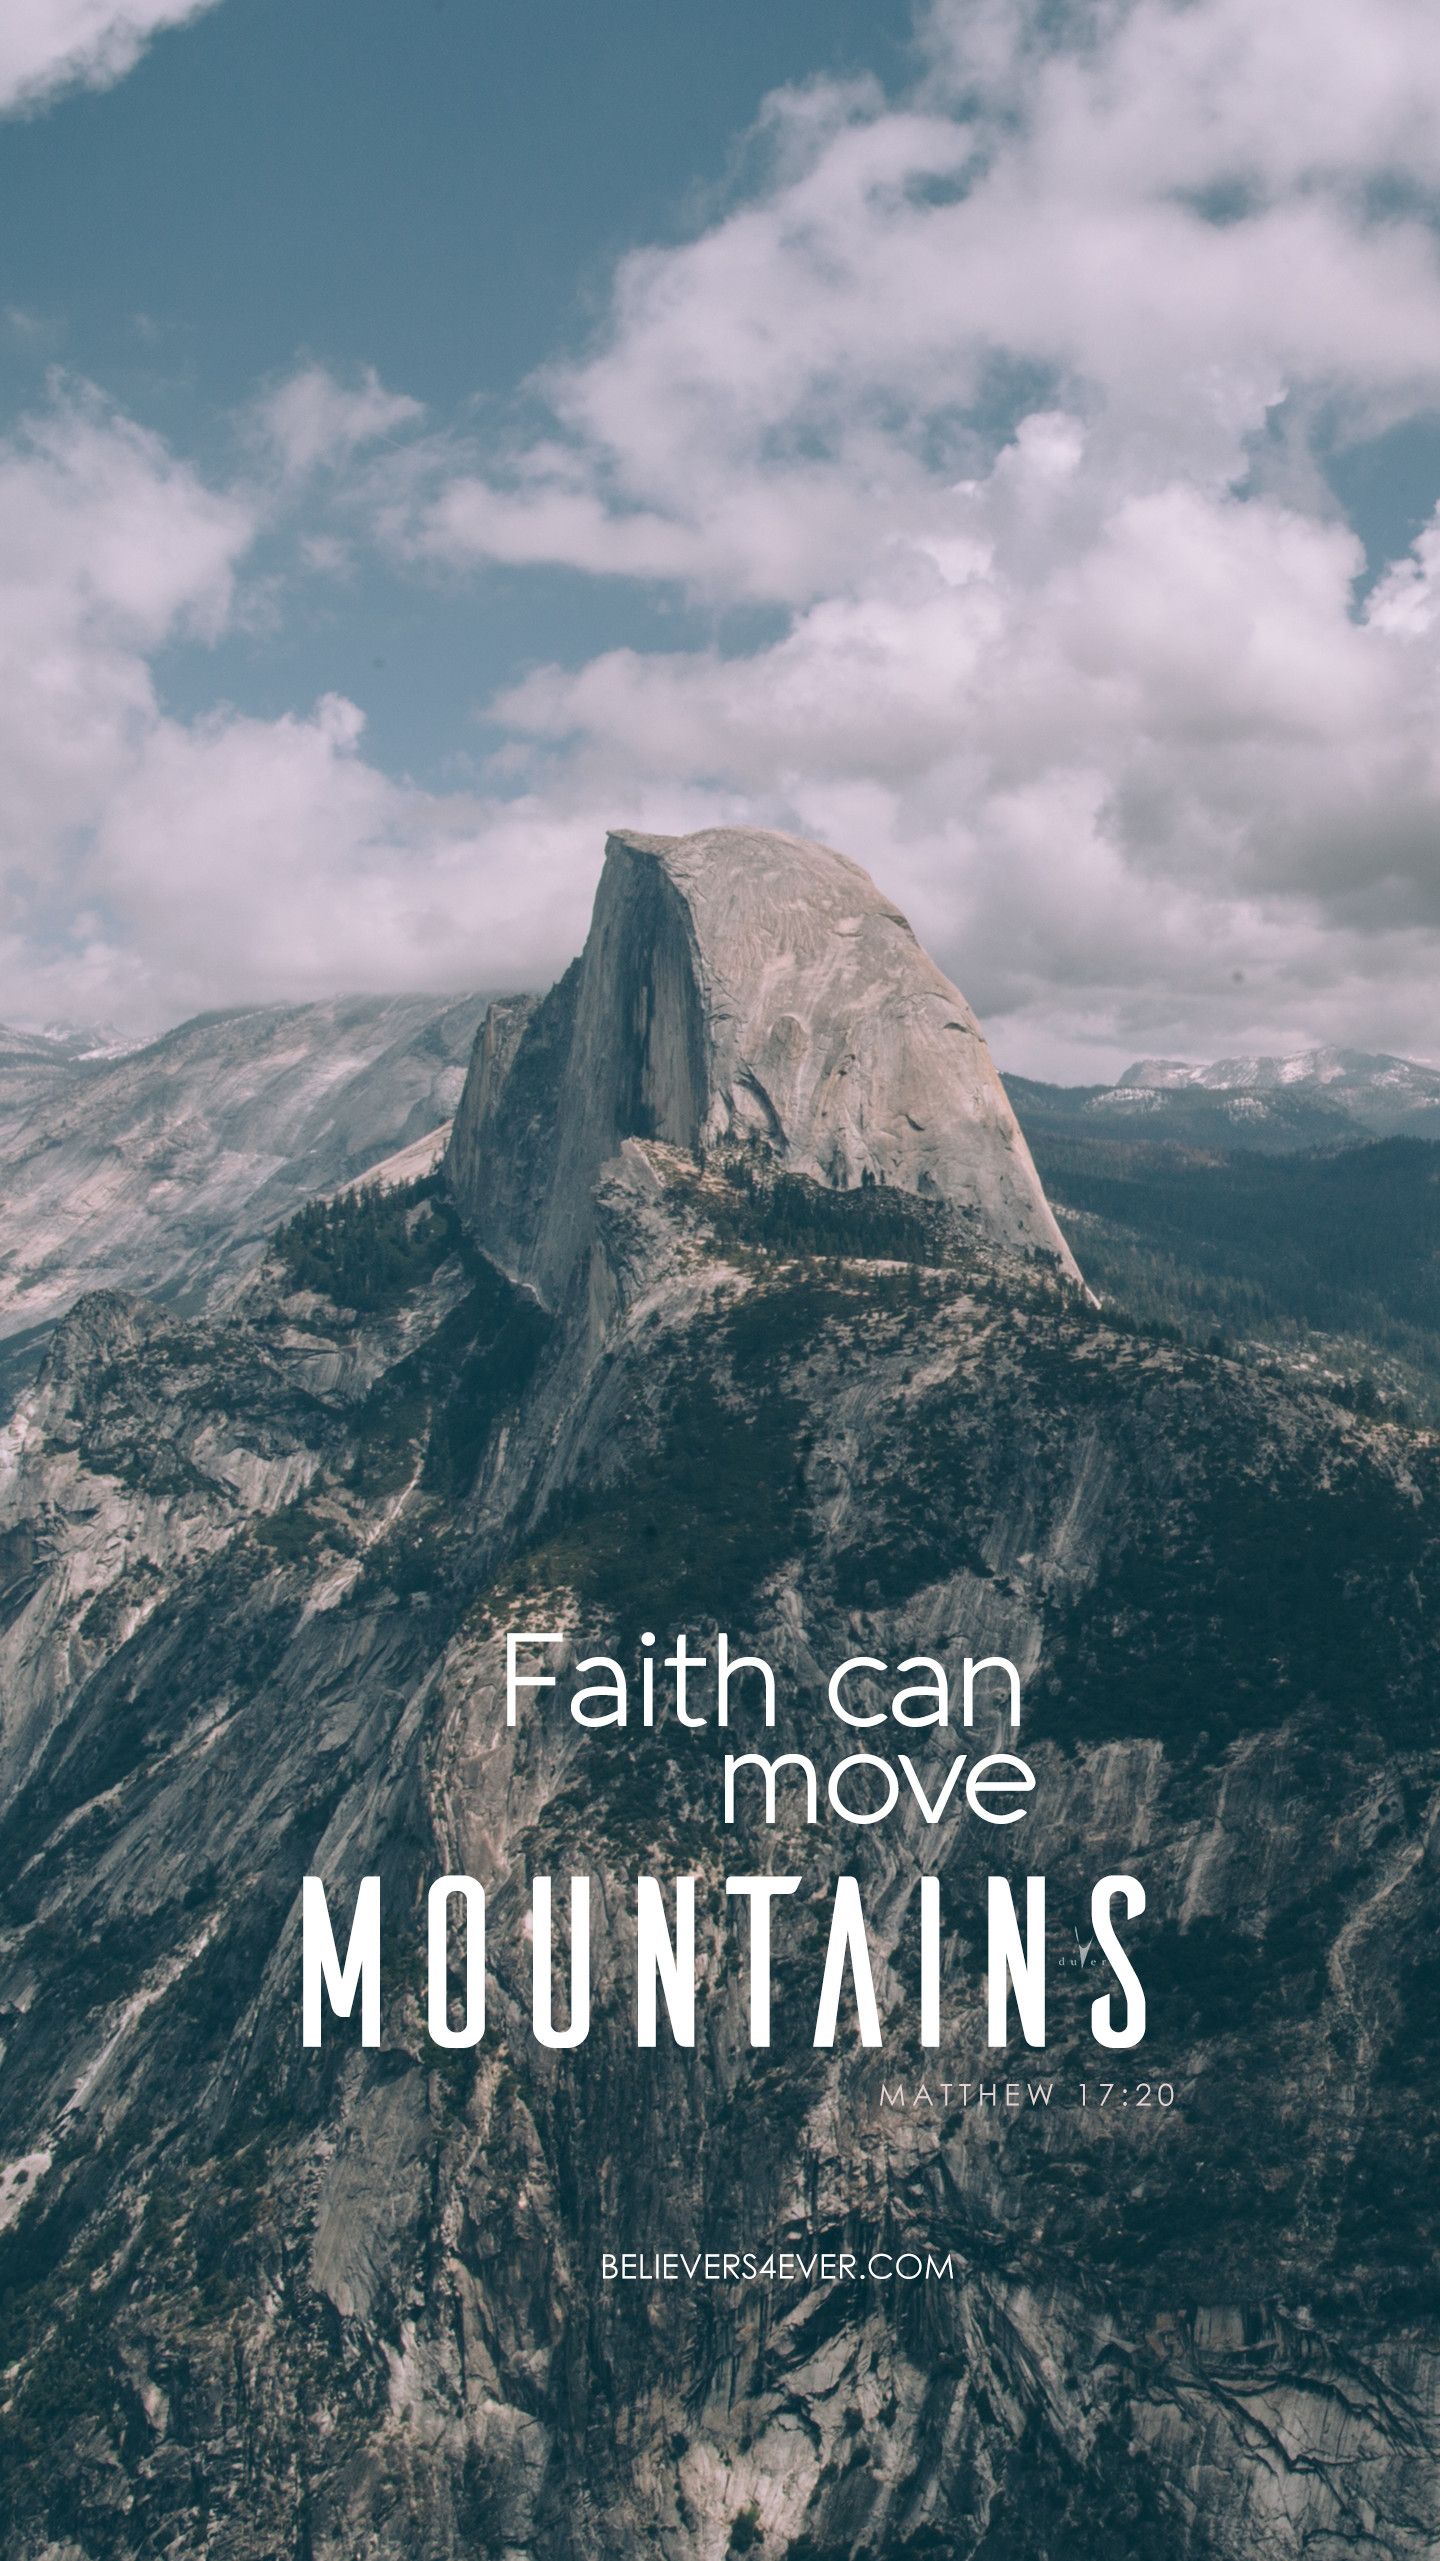 Free download Christian Wallpaper for iPhone - [1440x2561] for your Desktop, Mobile & Tablet. Explore Psalm 143 8 iPhone Wallpaper. Psalm 143 8 iPhone Wallpaper, Psalm 16 8 Wallpaper iPhone, Psalm Wallpaper